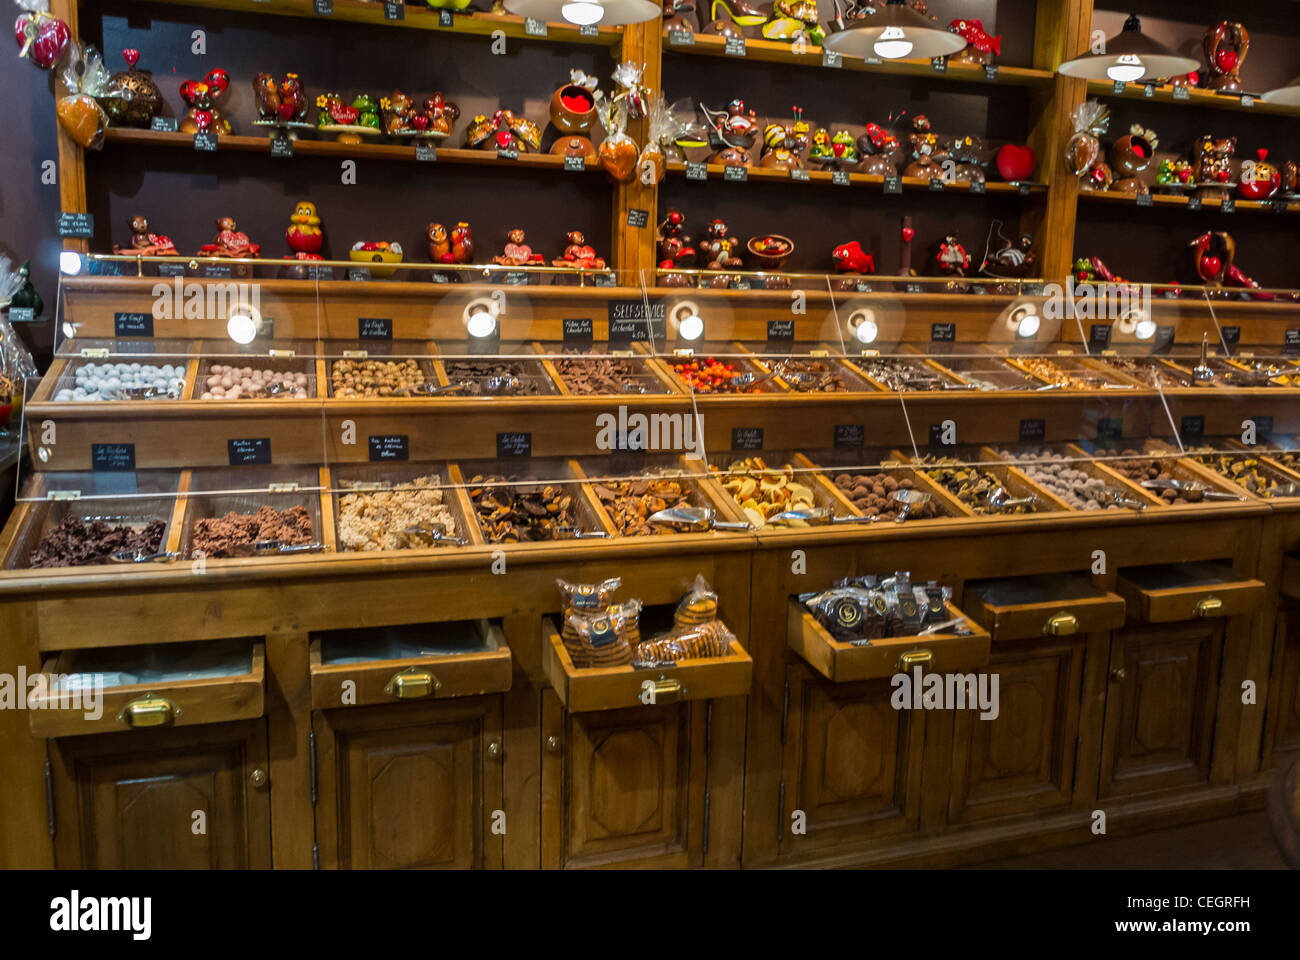 Paris, France, French Chocolatier Shop, 'Maison Georges Larnicol', pastries, Chocolates display on shelves, Stock Photo